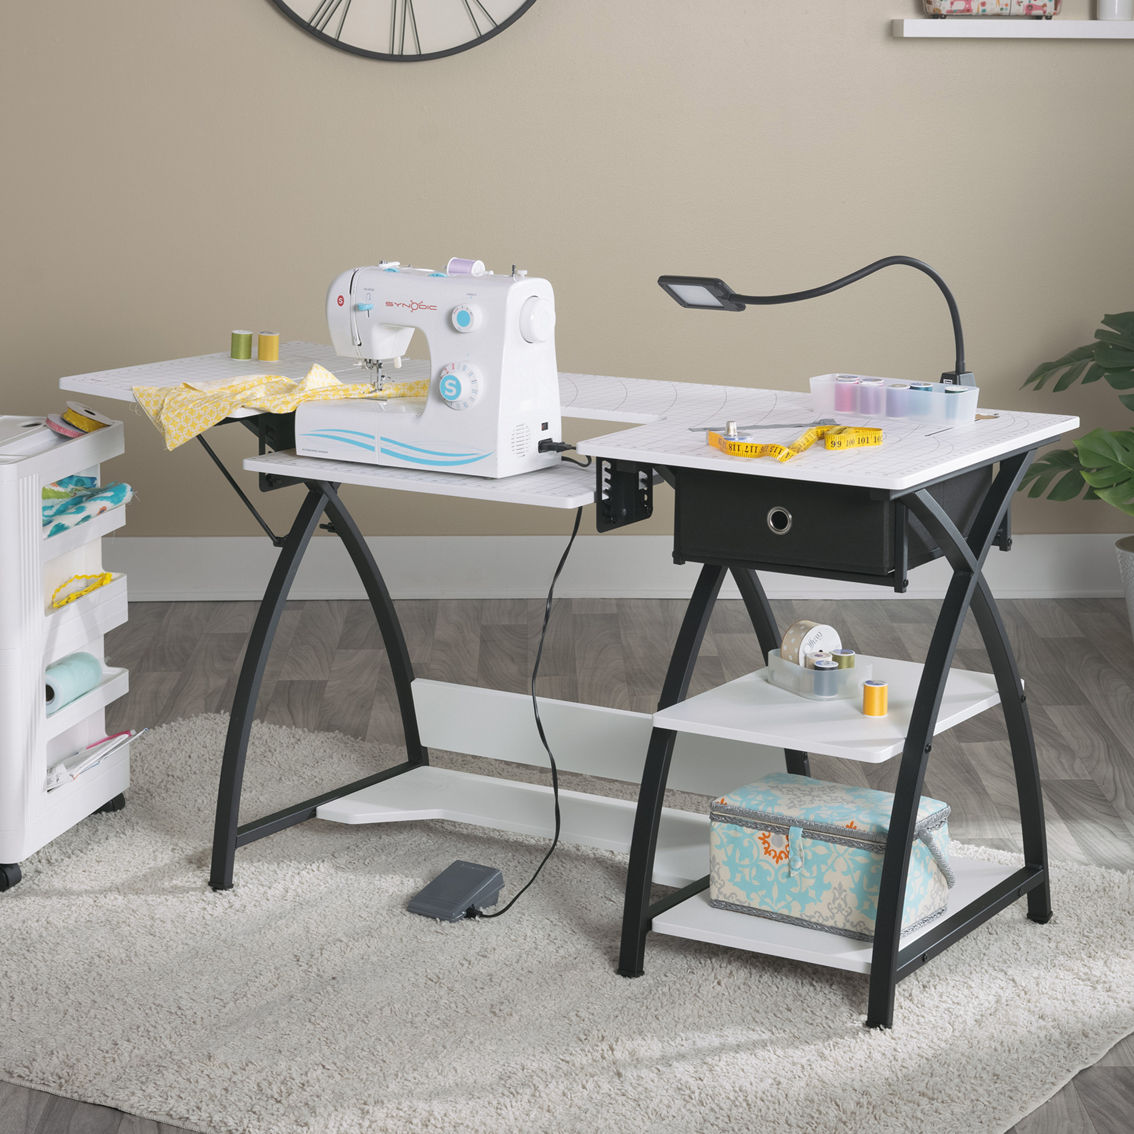 Studio Designs Comet Plus Hobby and Sewing Center with Grid - Image 9 of 10